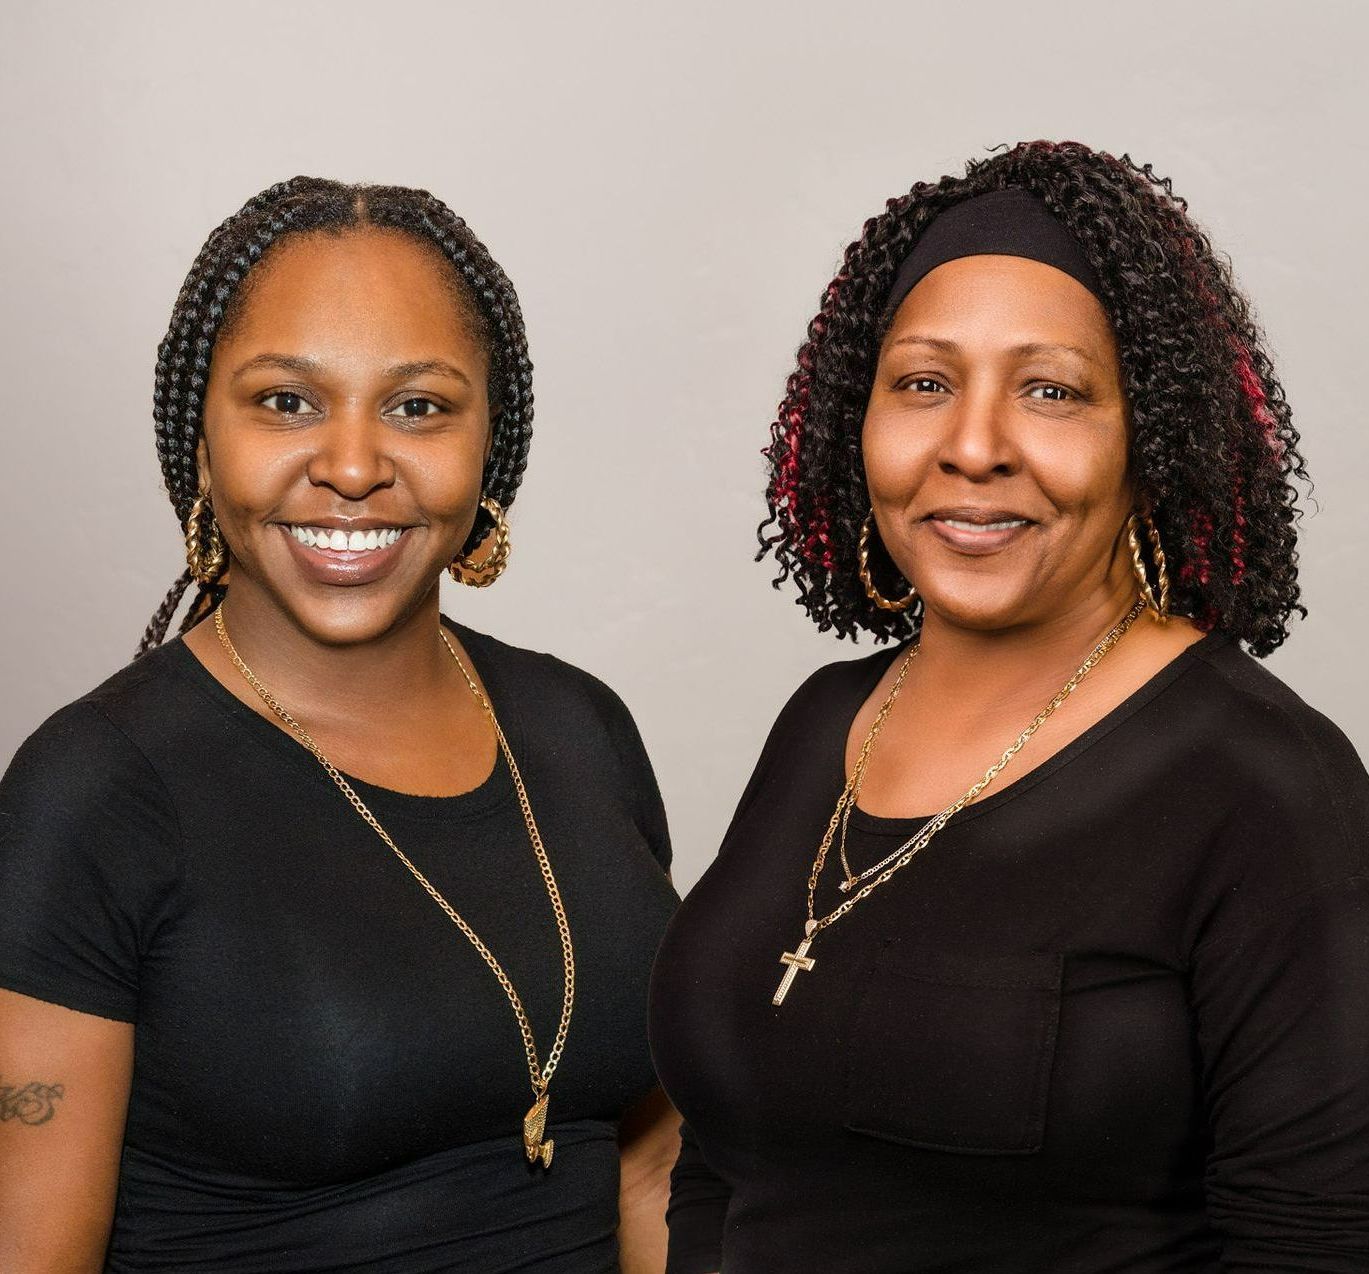 Two women standing next to each other wearing black shirts and gold necklaces